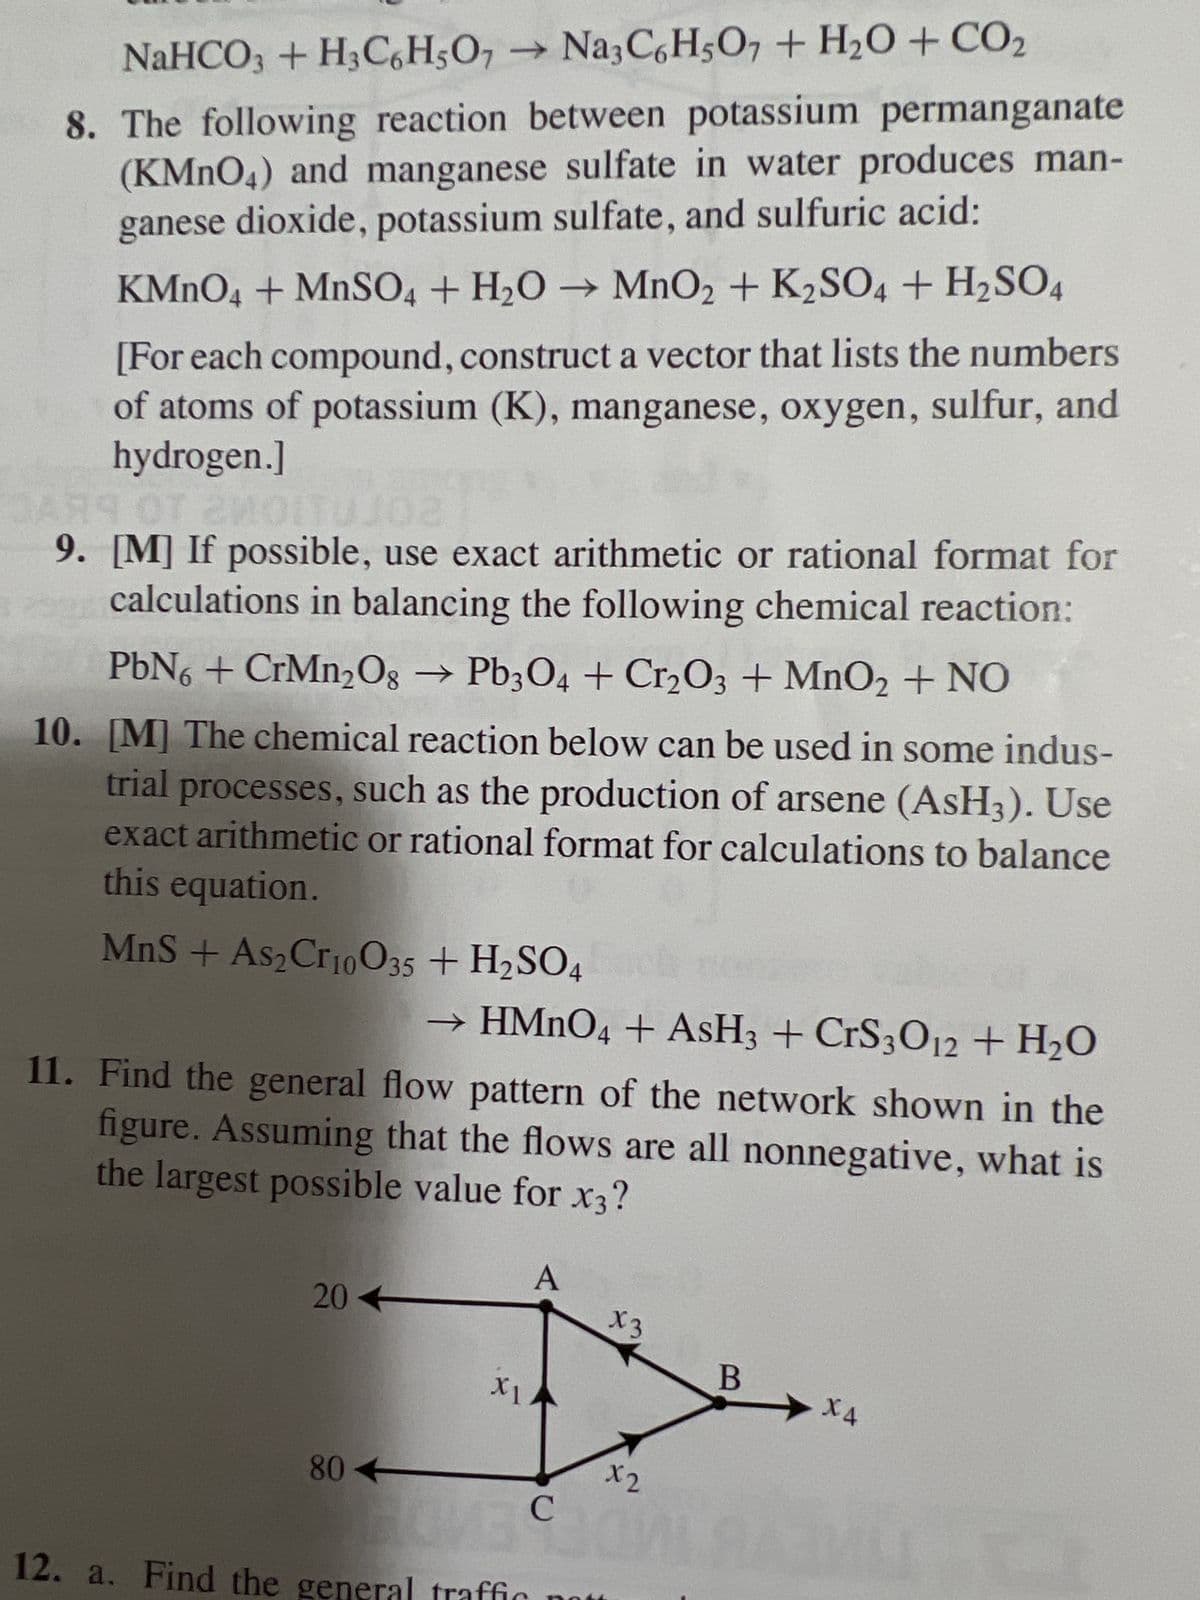 NaHCO3+H3C6H5O7
→ Na3C6H5O7 + H₂O + CO₂
8. The following reaction between potassium permanganate
(KMnO4) and manganese sulfate in water produces man-
ganese dioxide, potassium sulfate, and sulfuric acid:
KMnO4 + MnSO4+H₂O → MnO2 + K2SO4 + H₂SO4
[For each compound, construct a vector that lists the numbers
of atoms of potassium (K), manganese, oxygen, sulfur, and
hydrogen.]
R9
DAR9
OT 2MOITUJO2
9. [M] If possible, use exact arithmetic or rational format for
calculations in balancing the following chemical reaction:
PbN6 + CrMn₂O8 → Pb3O4 + Cr2O3 + MnO₂ + NO
10. [M] The chemical reaction below can be used in some indus-
trial processes, such as the production of arsene (AsH3). Use
exact arithmetic or rational format for calculations to balance
this equation.
MnS + As₂ Cr10035 + H₂SO4
11. Find the general flow pattern of the network shown in the
figure. Assuming that the flows are all nonnegative, what is
the largest possible value for x3?
20
→ HMnO4 + AsH3 + CrS3012 + H₂O
80
XI
A
X3
x2
C
BOVE JO
12. a. Find the general traffic no
B
X4